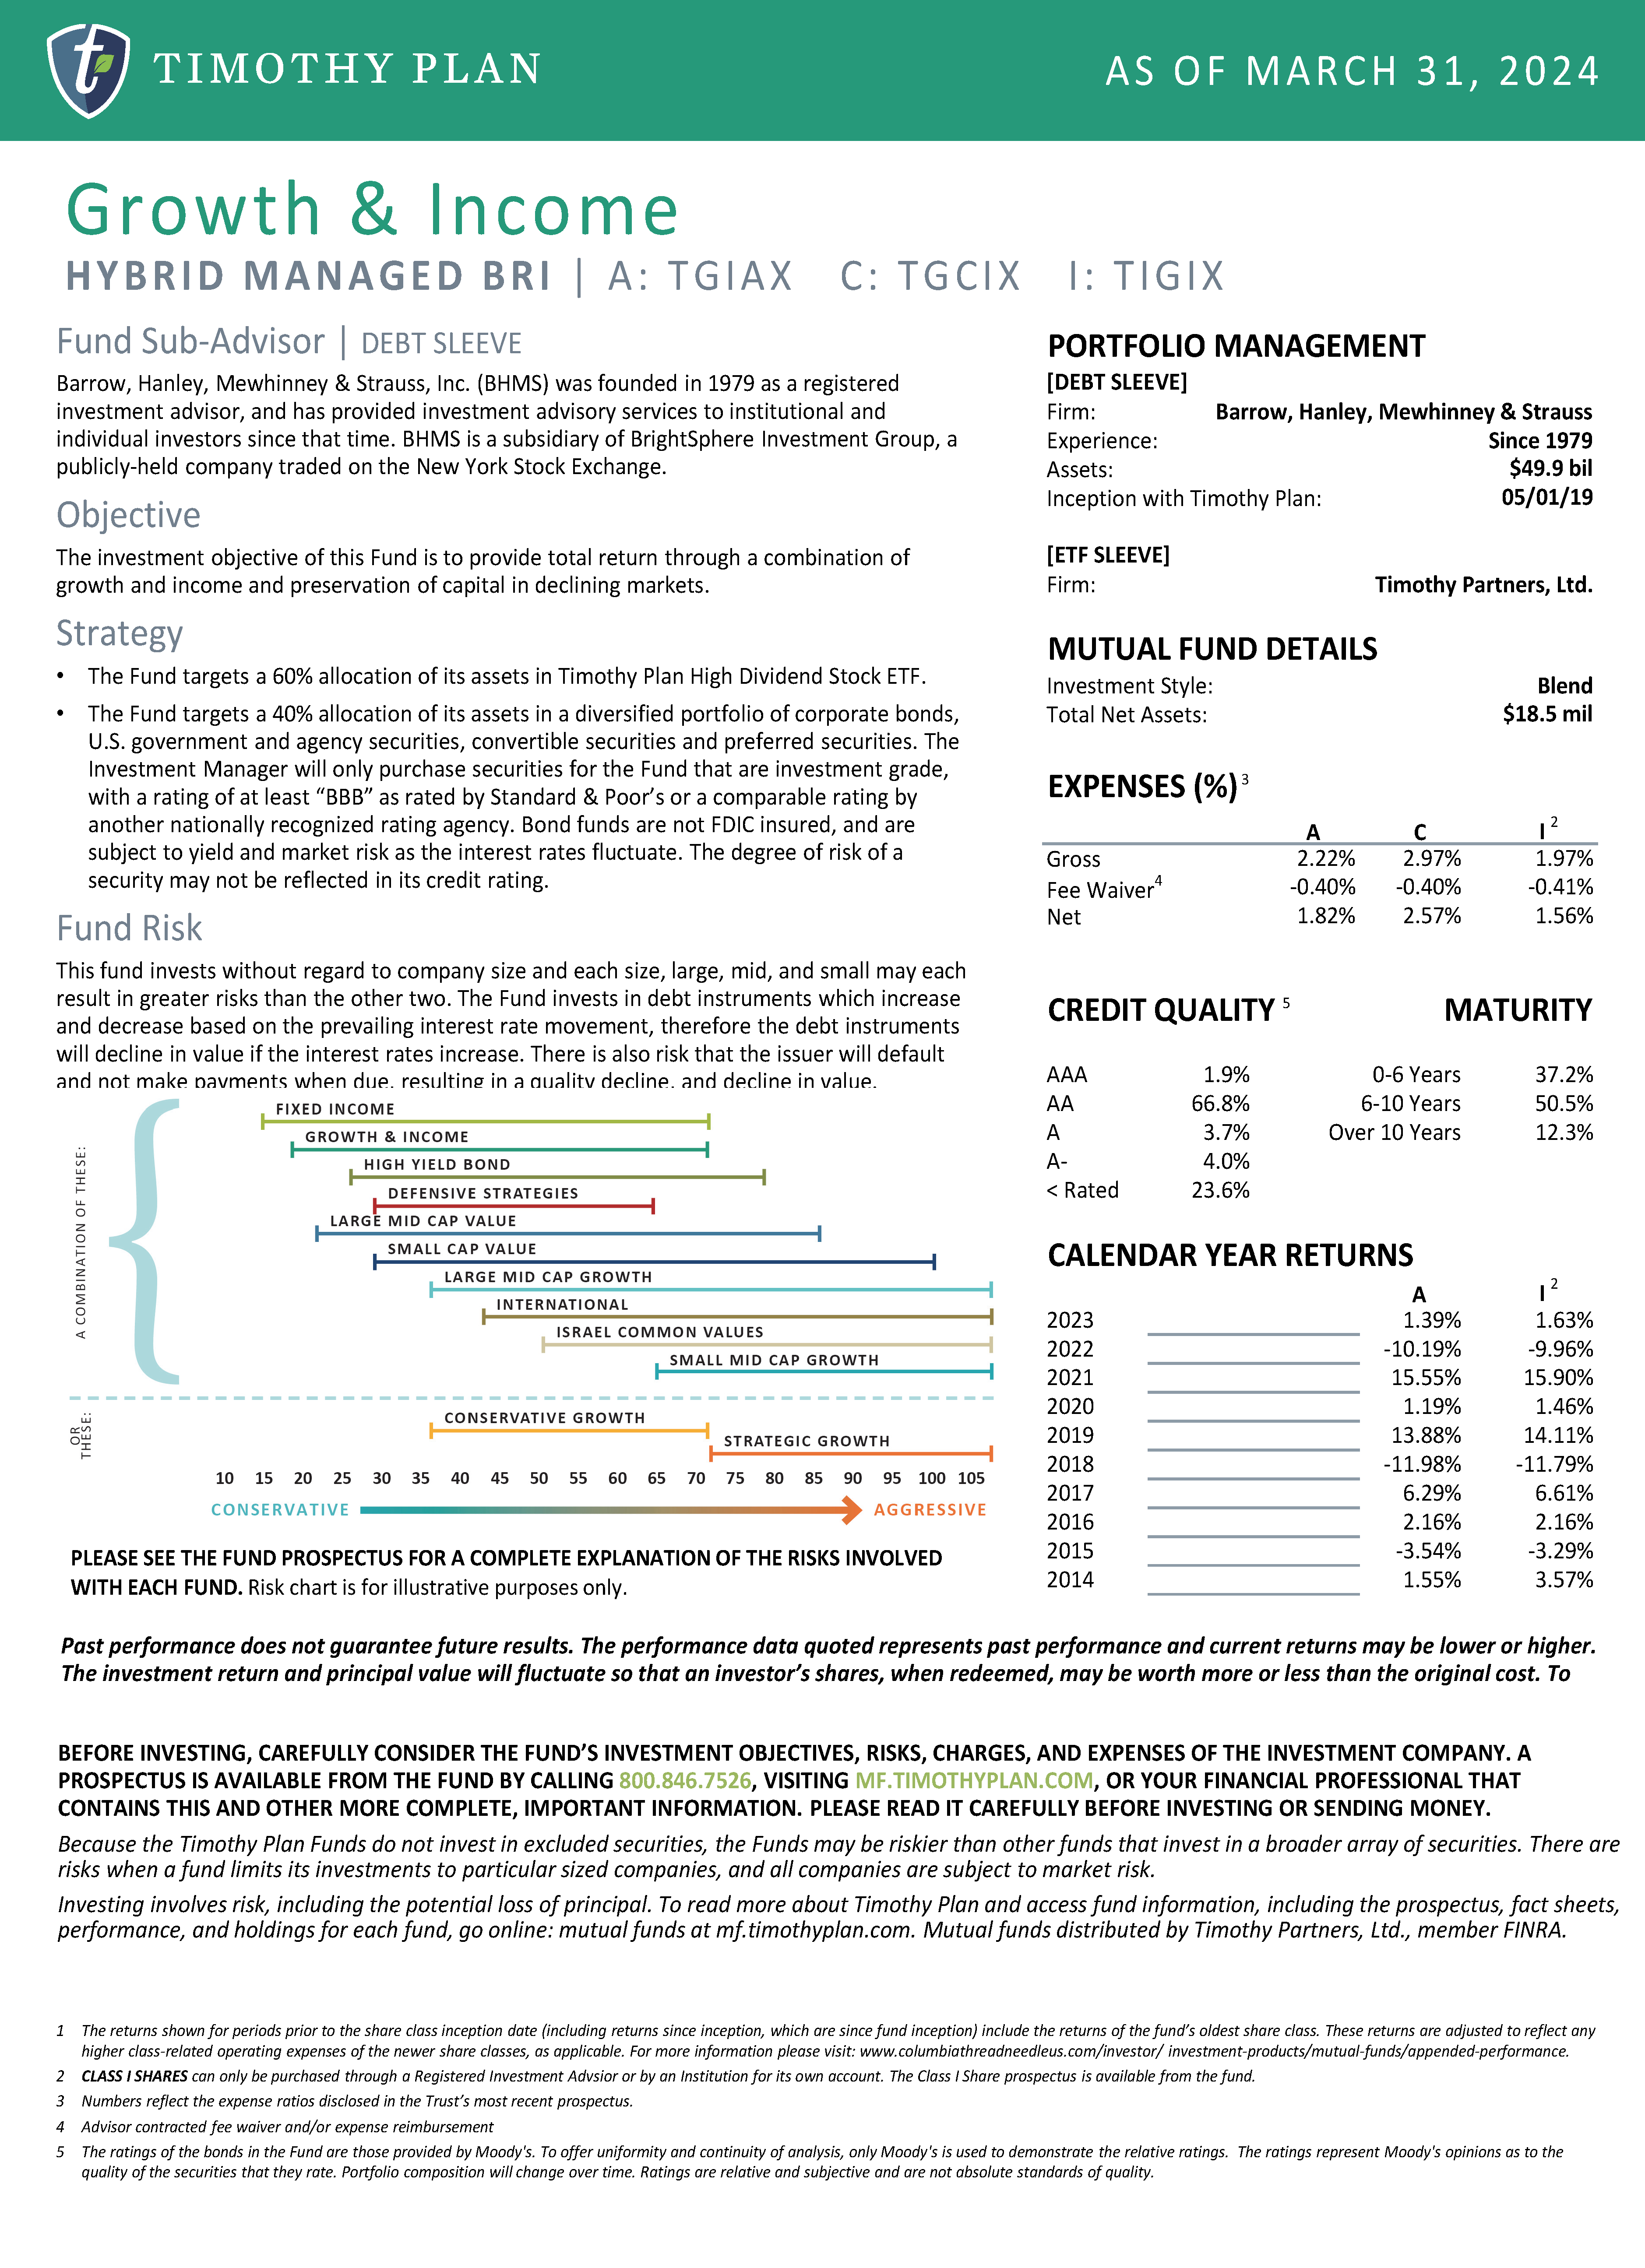 Growth Income Page 2